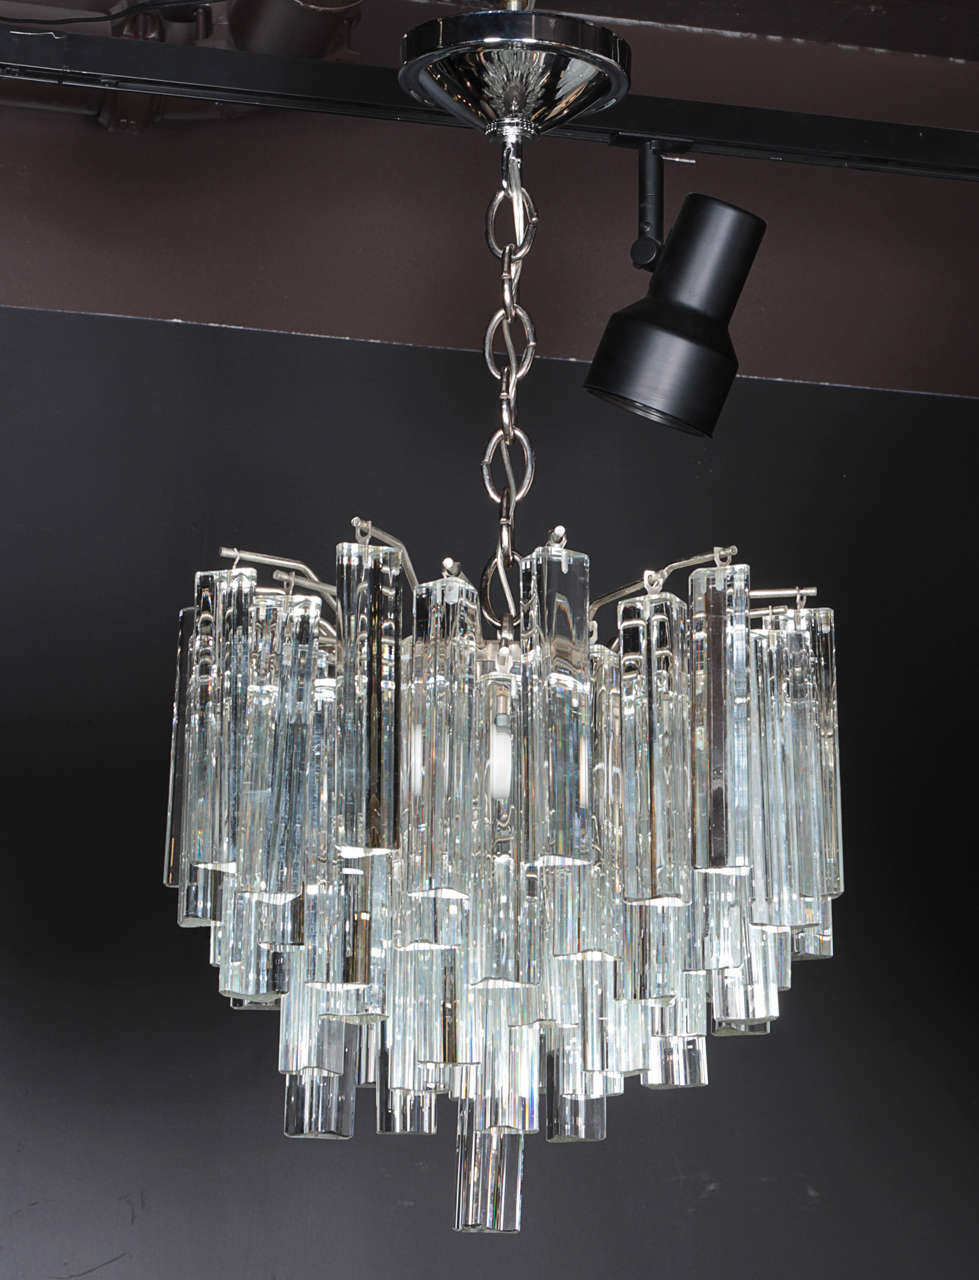 Gorgeous small-scale chandelier by Venini for Camer. Chandelier has multiple tier design comprised of trihedral crystal prisms throughout. The fixture has a chromed steel frame with polished chrome canopy and fittings. Fitted with four lights